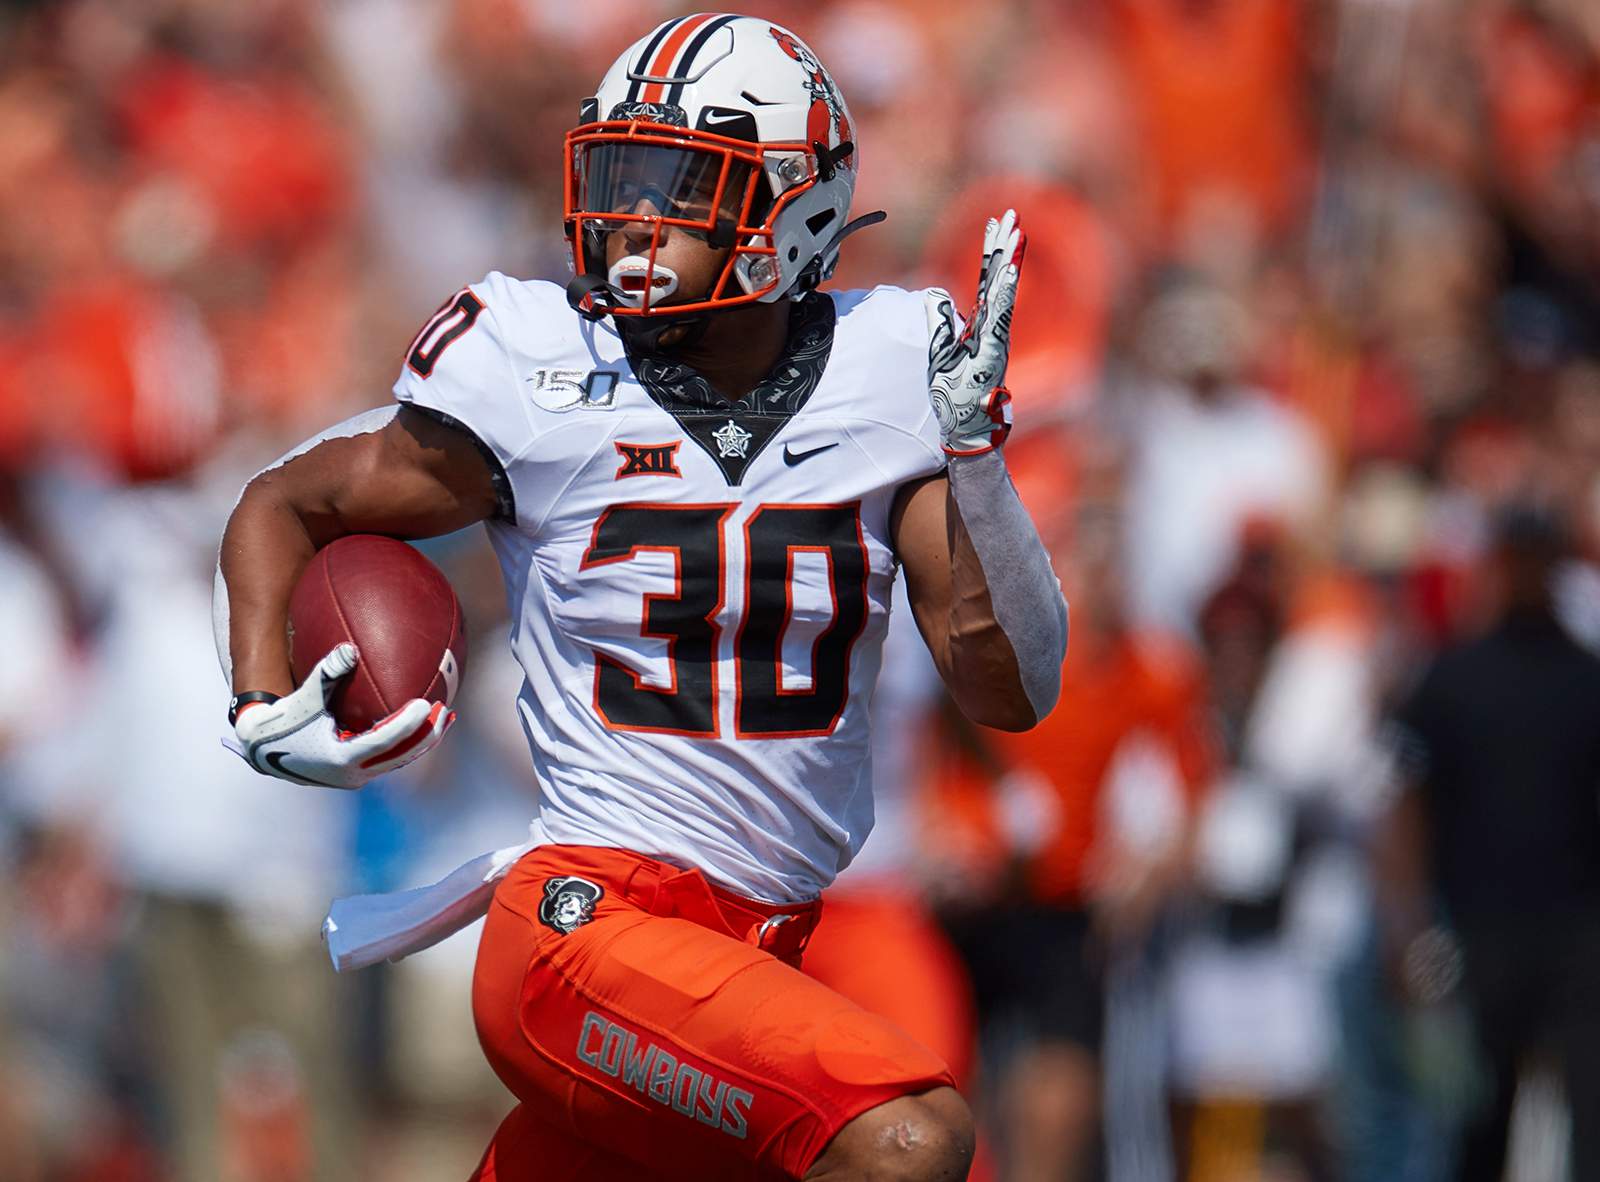 Oklahoma State football coach responds after star running back Chuba Hubbard calls for change